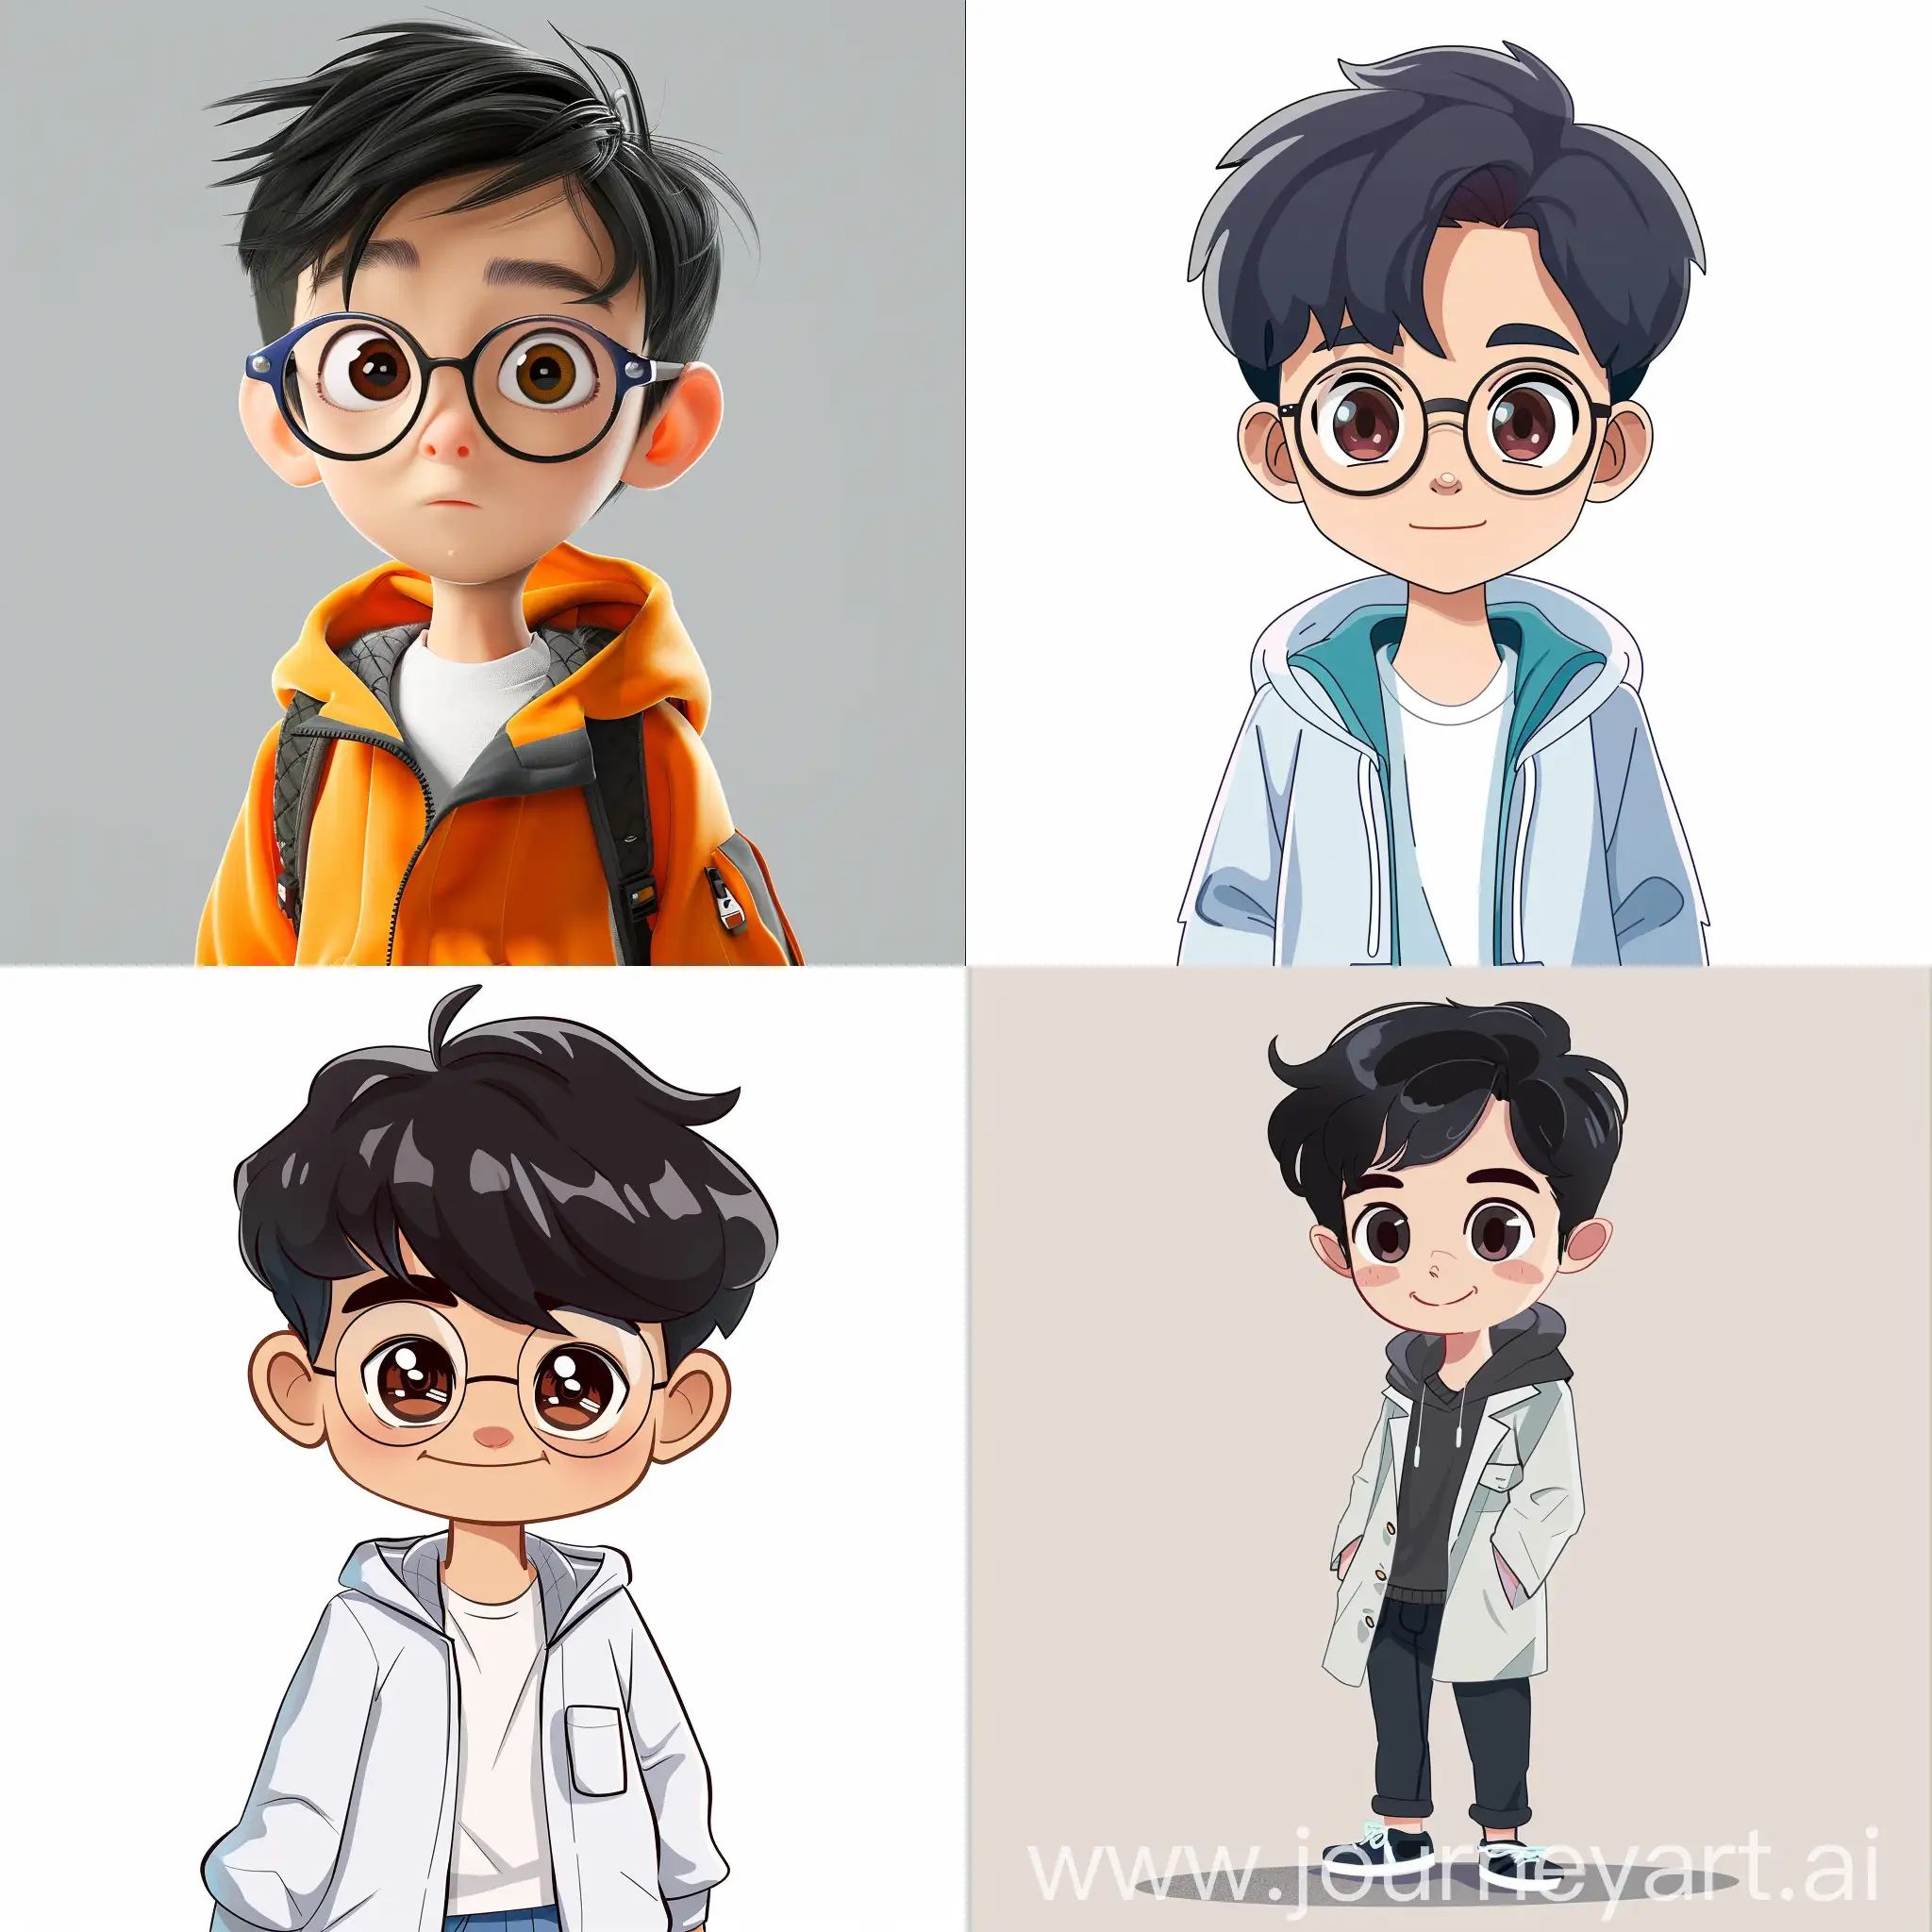 Character, Animation, Korean boys 10years old, Looks cute and smart. He's main character of adverture story. He loves science and technology. 